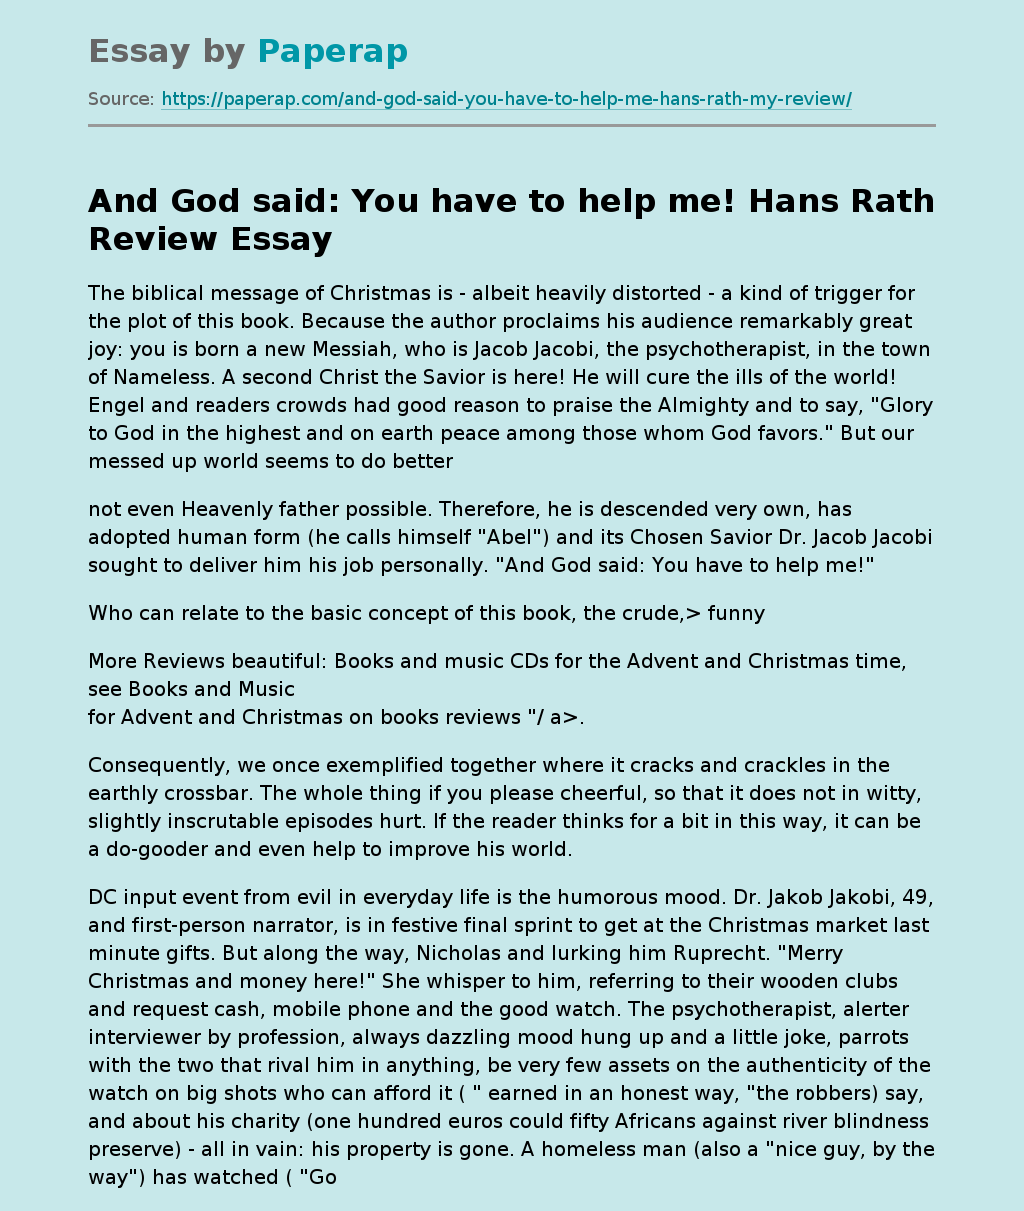 And God said: You have to help me! Hans Rath Review